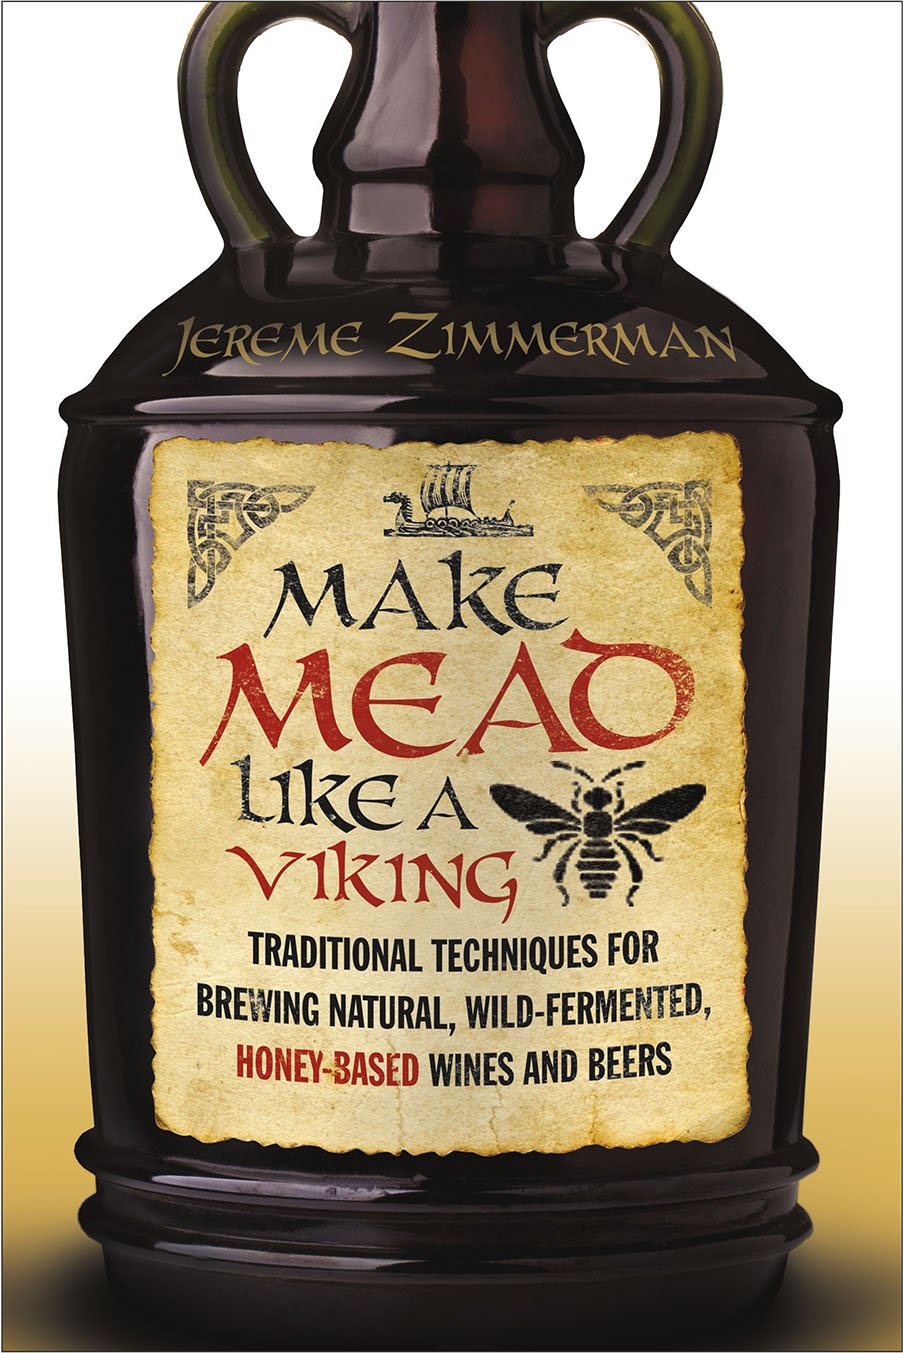 Make Mead Like a Viking: Traditional Techniques for Brewing Natural, Wild-Fermented, Honey-Based Wines and Beers (Jereme Zimmerman)